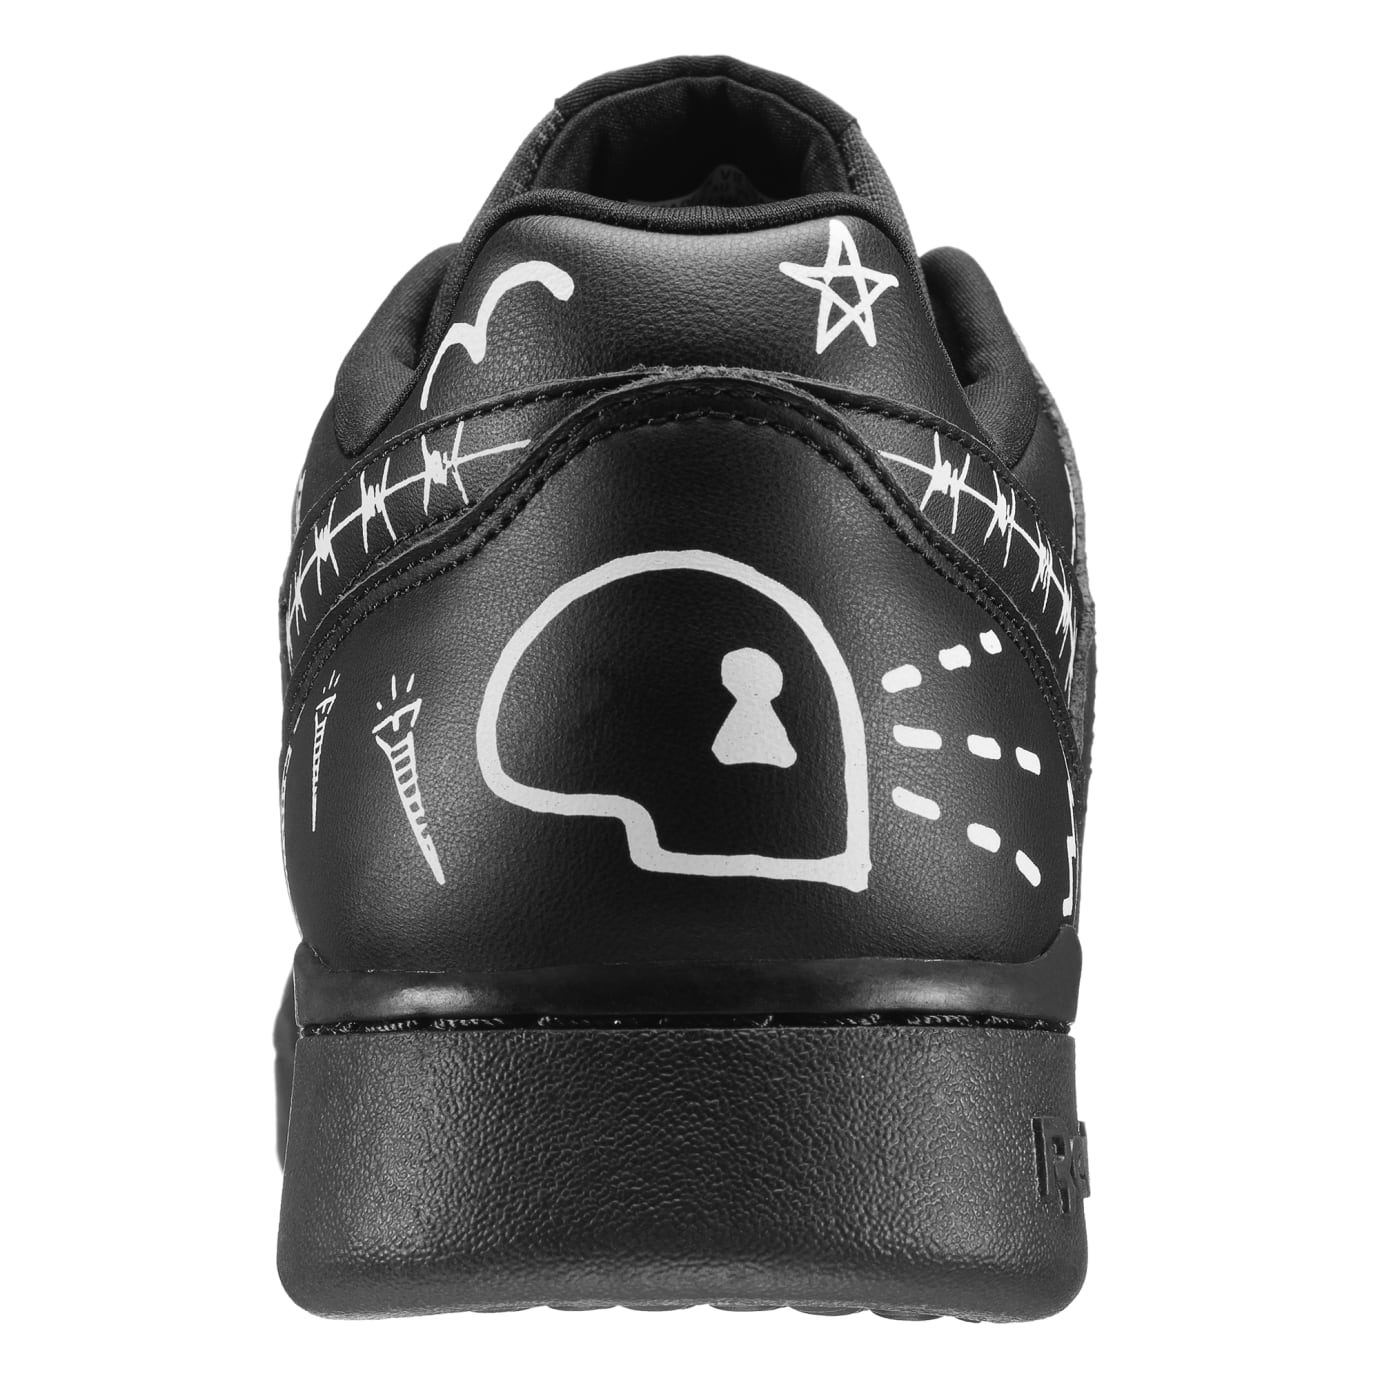 Trouble Andrew Plus '3:AM' Black Available Now | Sole Collector